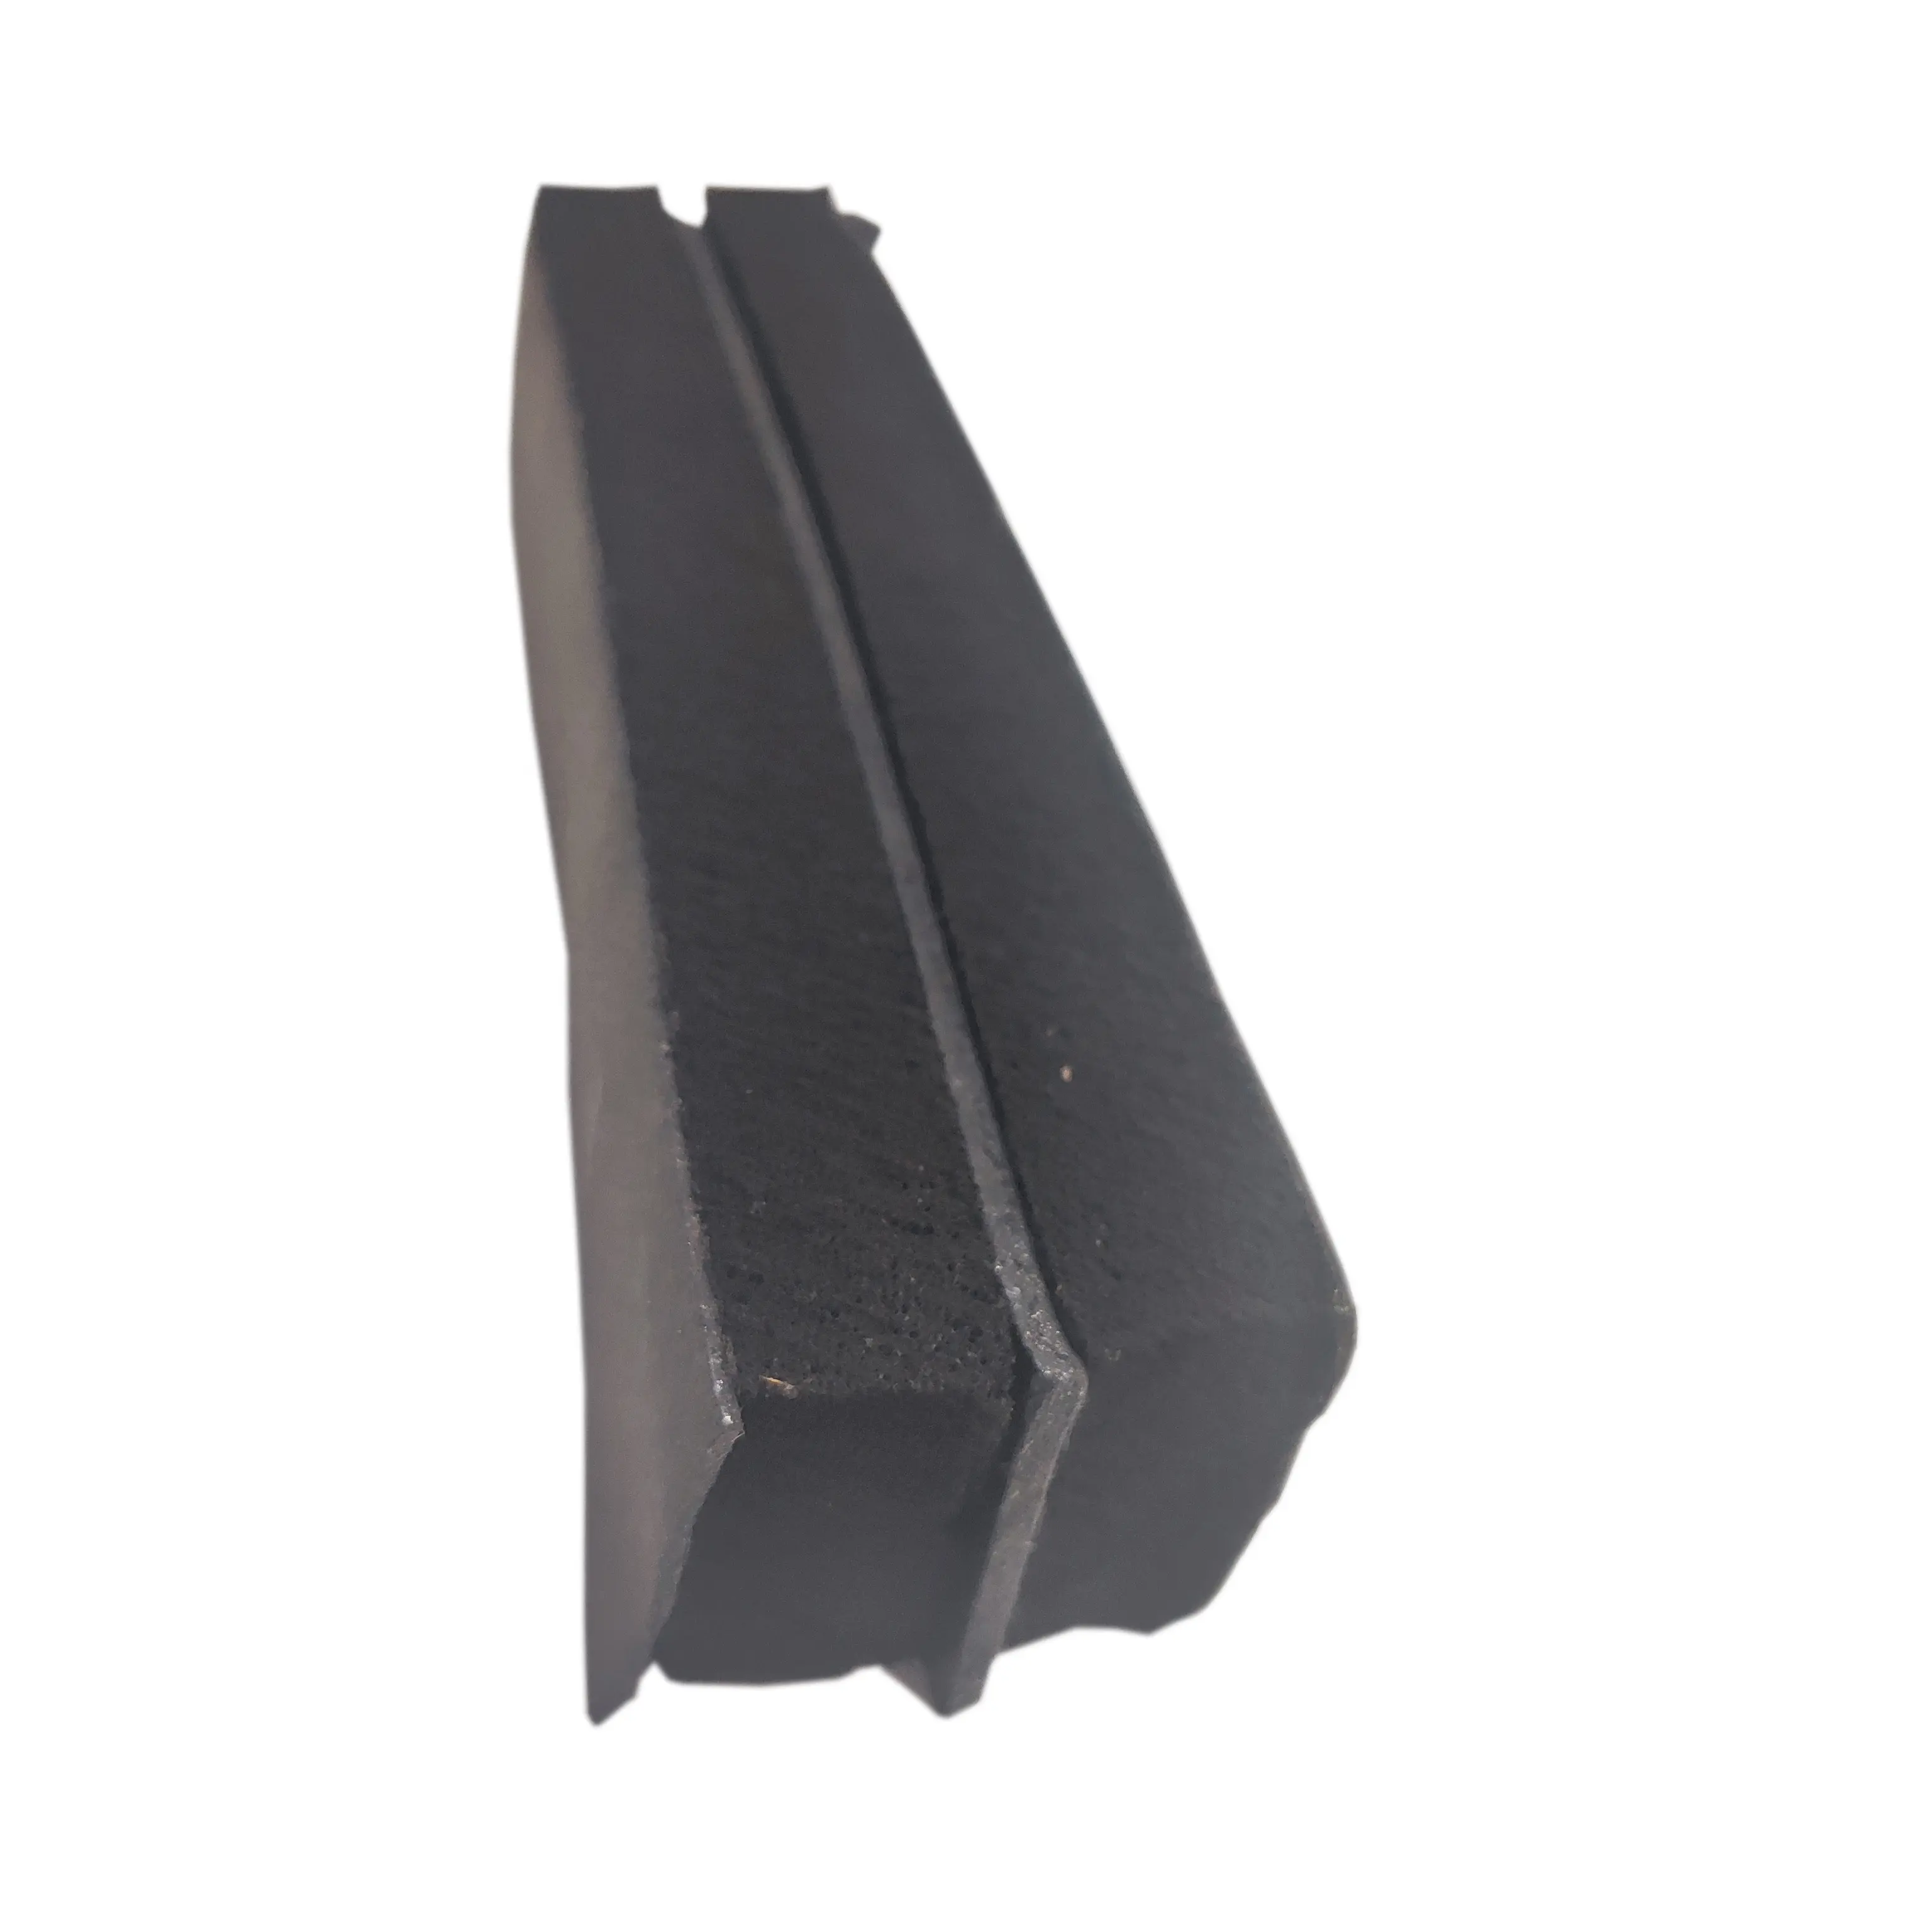 Acoustic Fire Foam / Intumescent Expansion Joint Seal